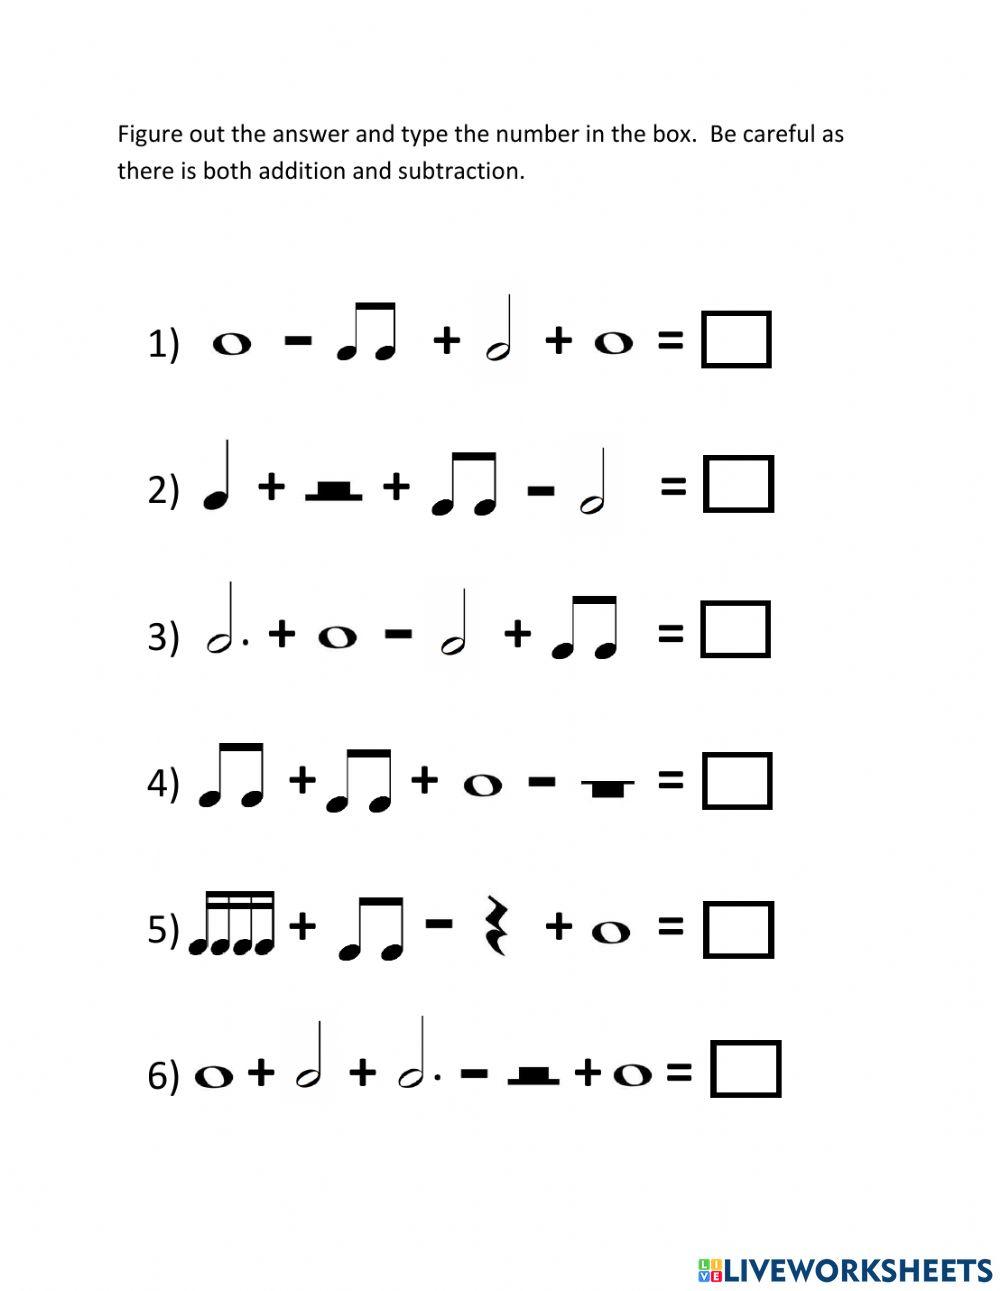 Music Notes and Rests